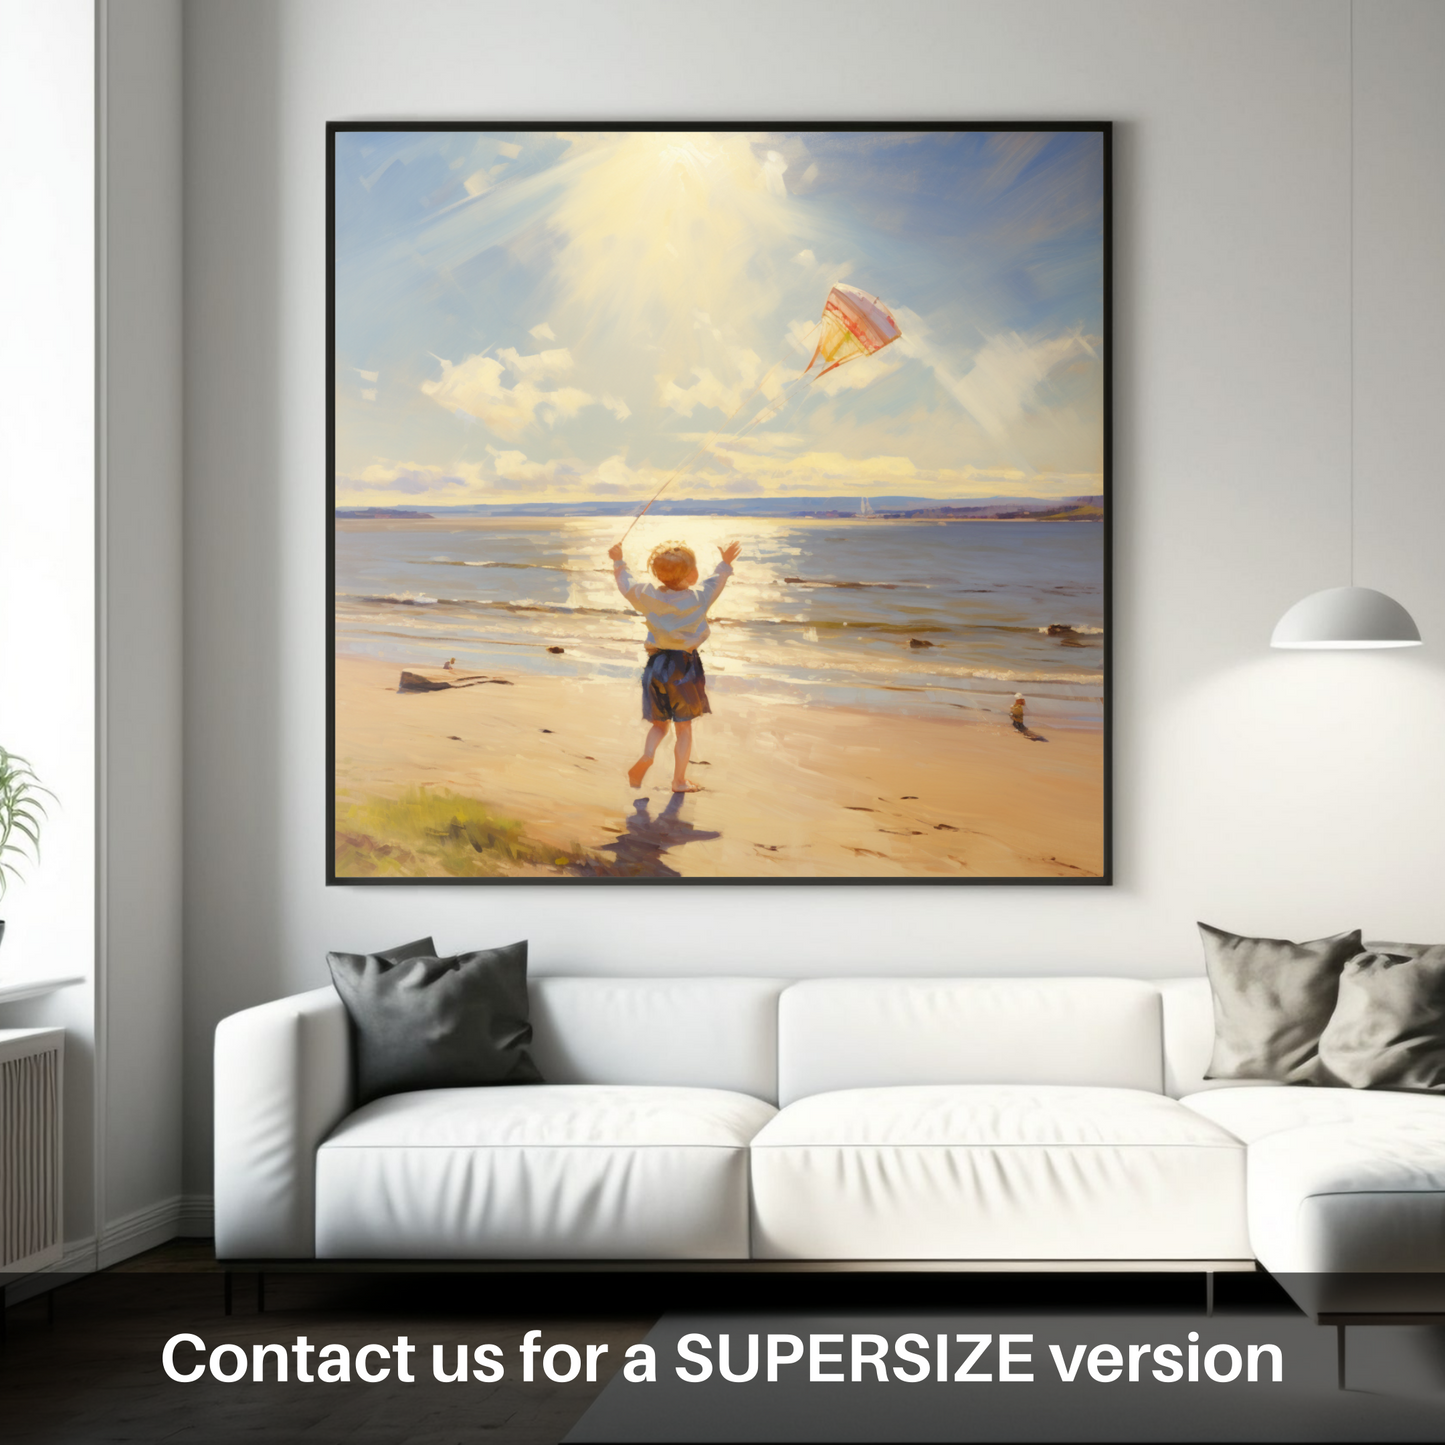 Huge supersize print of A young boy flying a kite on the expansive shores of Nairn Beach, with the Moray Firth sparkling in the sunlight